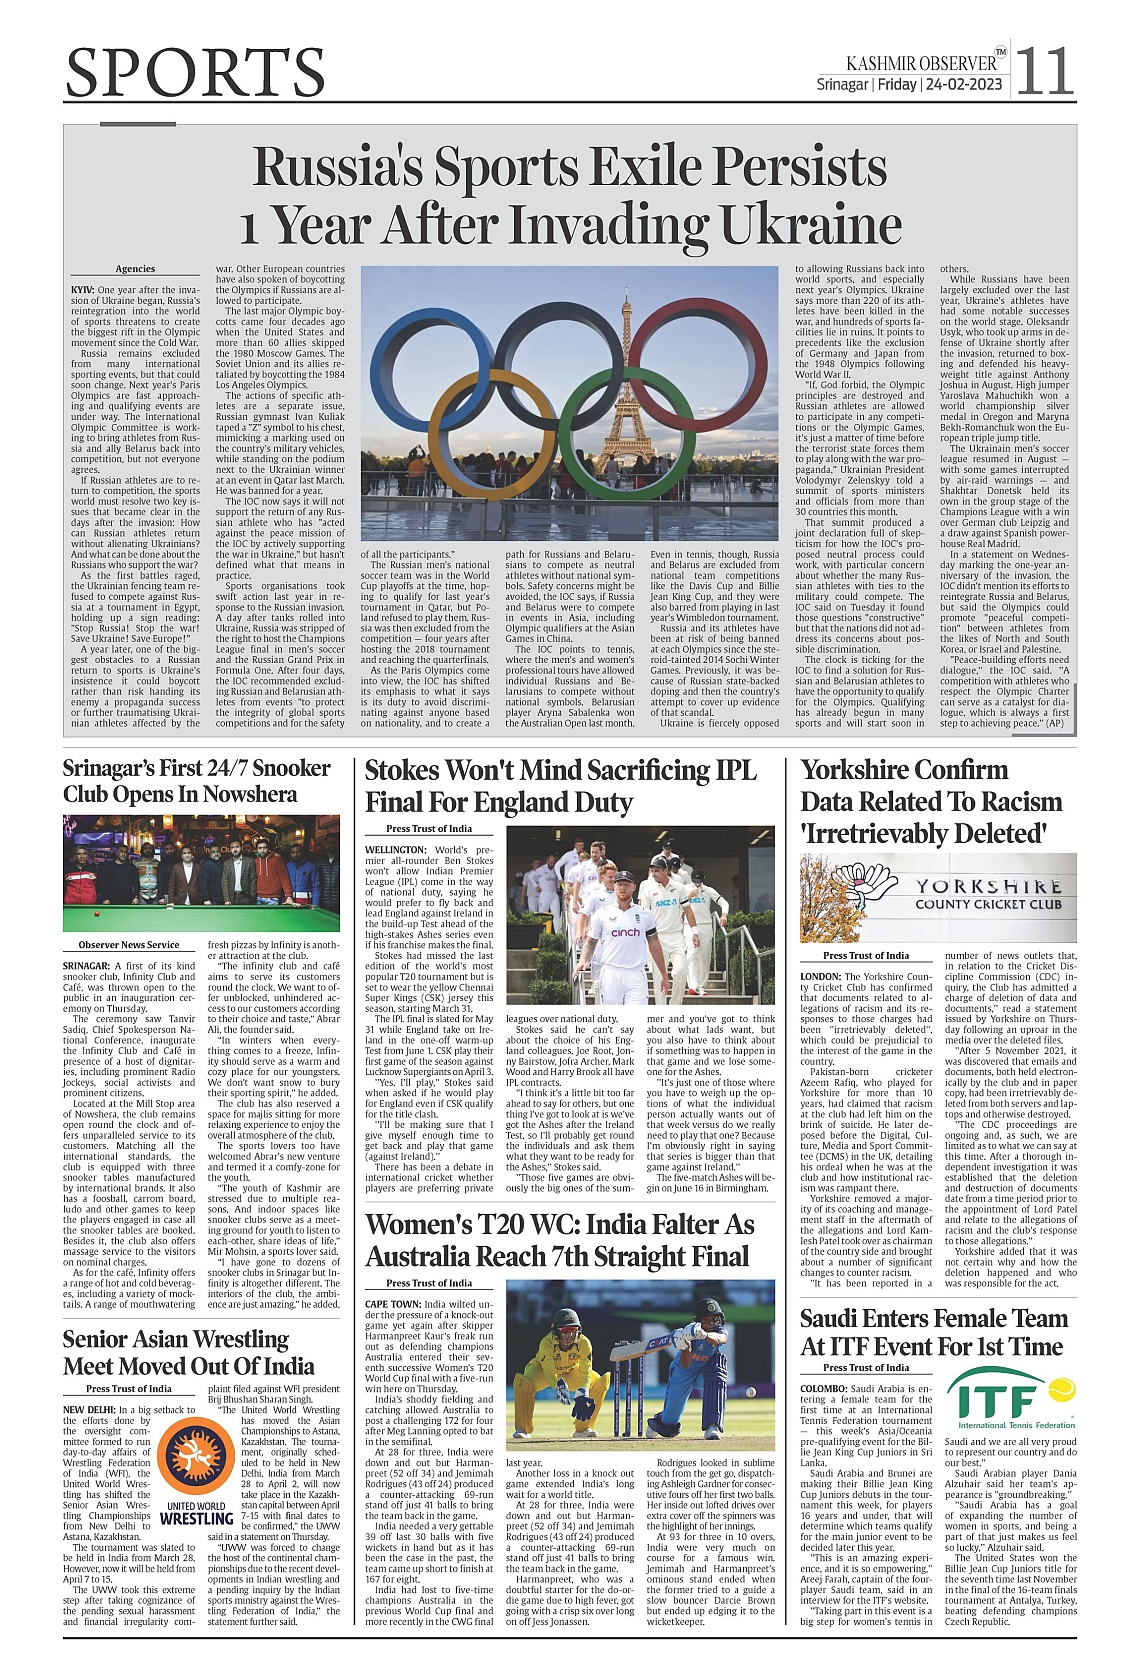 Print Edition for The Observer for Friday, Feb. 10, 2023 by The